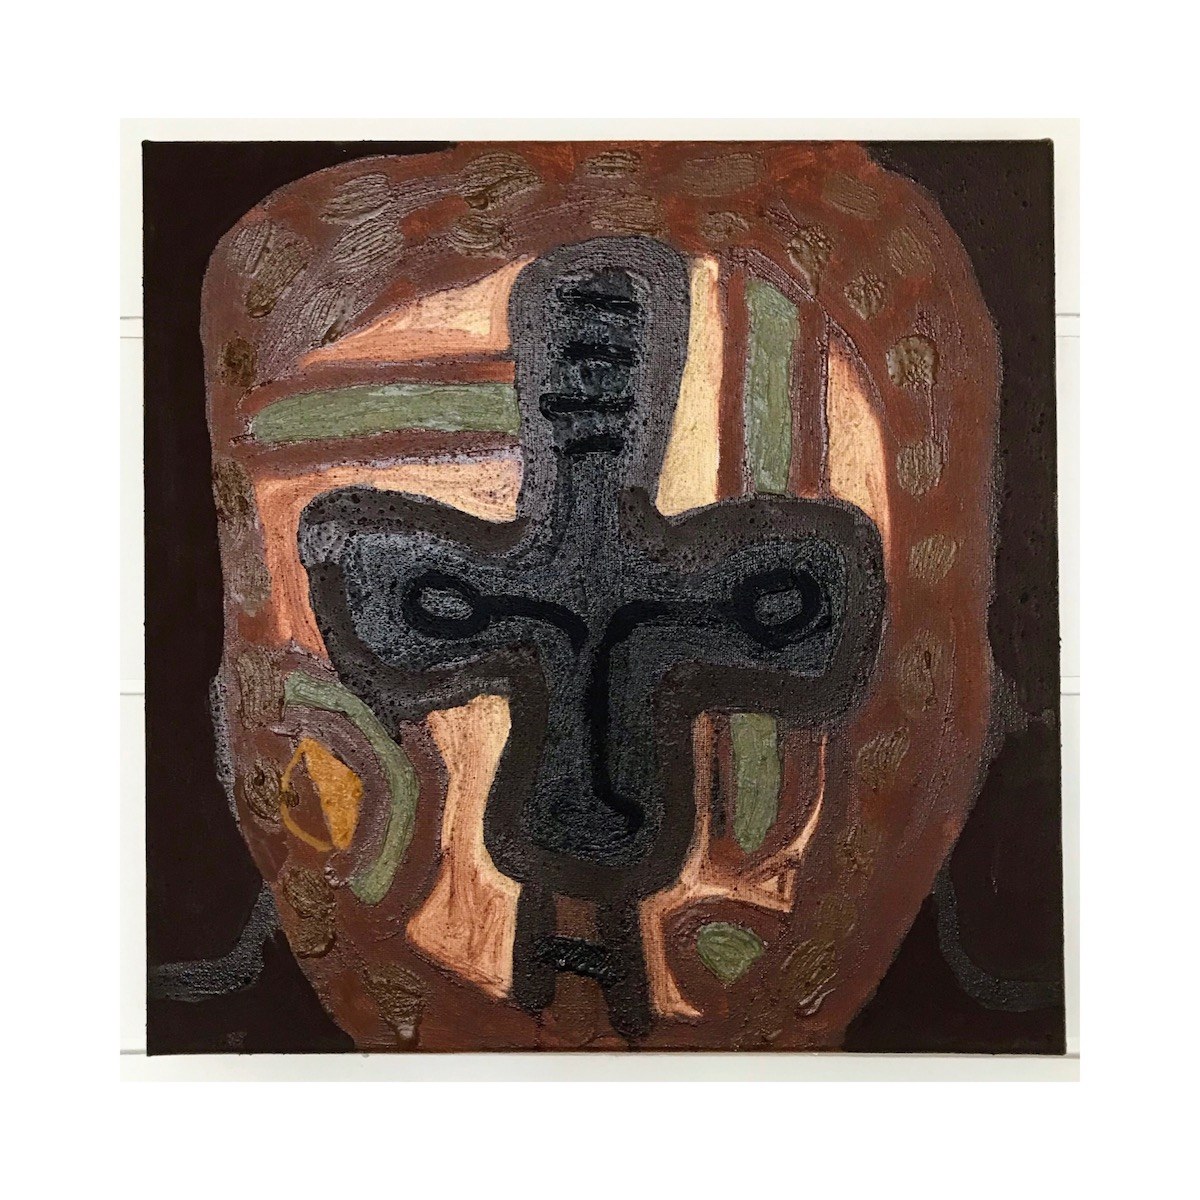 125 celtic very cross (Cornish earth pigments and linseed oil on canvas; 40x40cm)